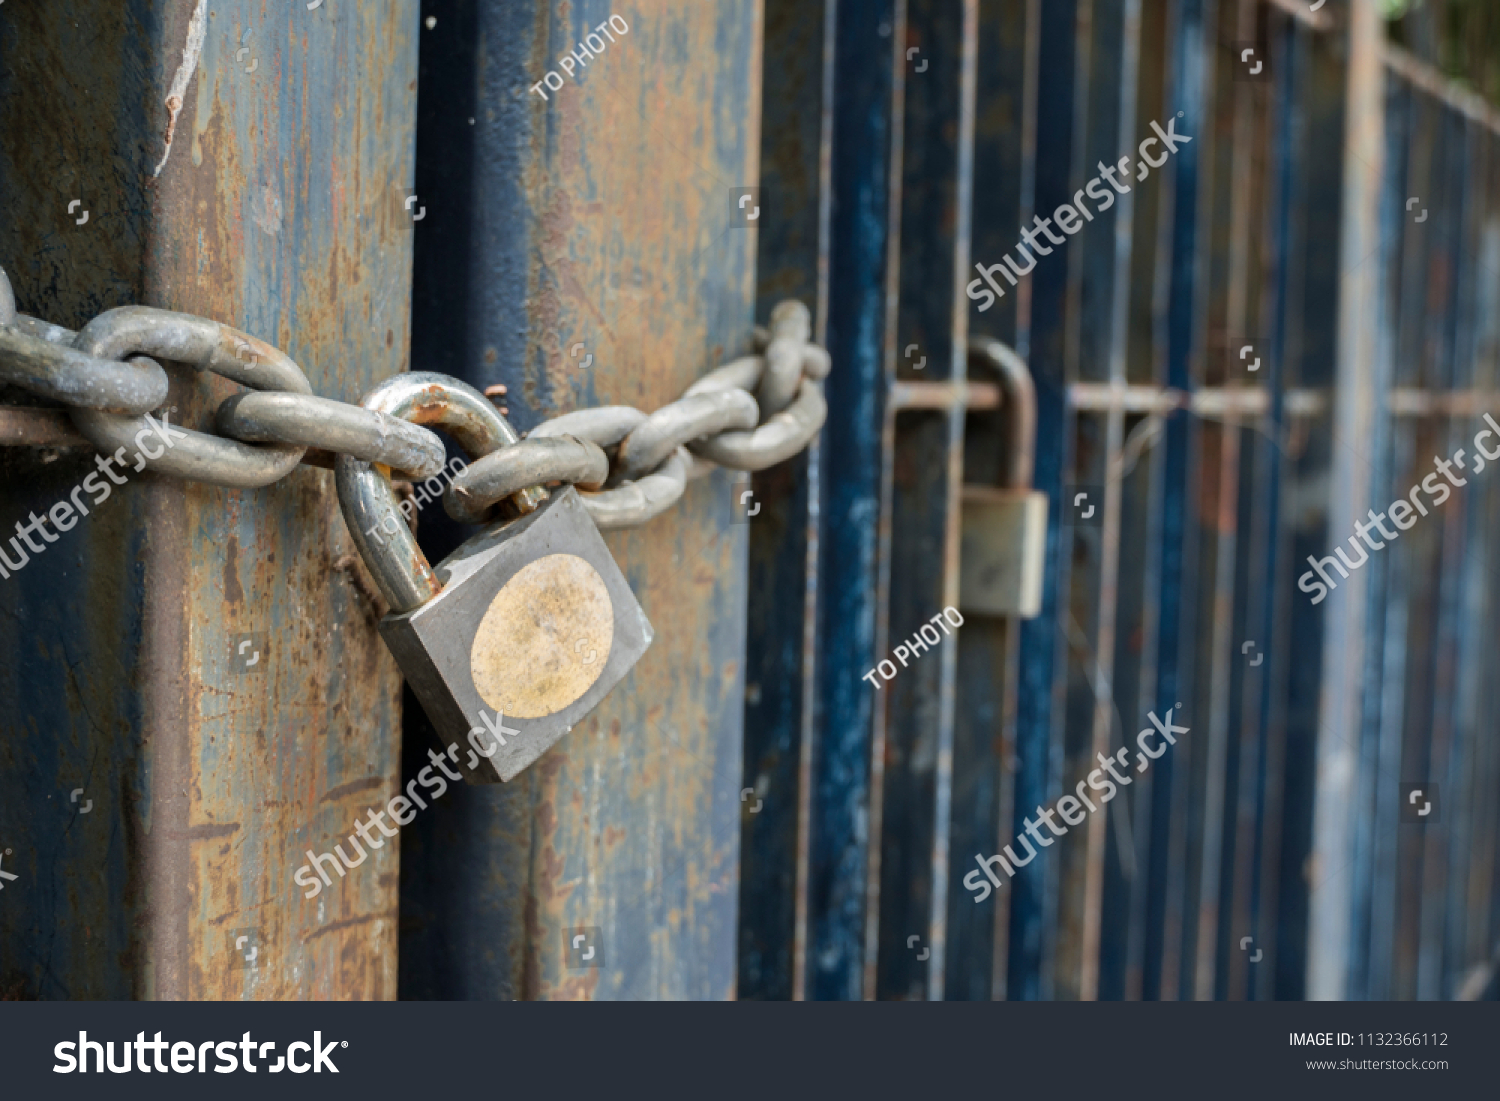 chains and locks